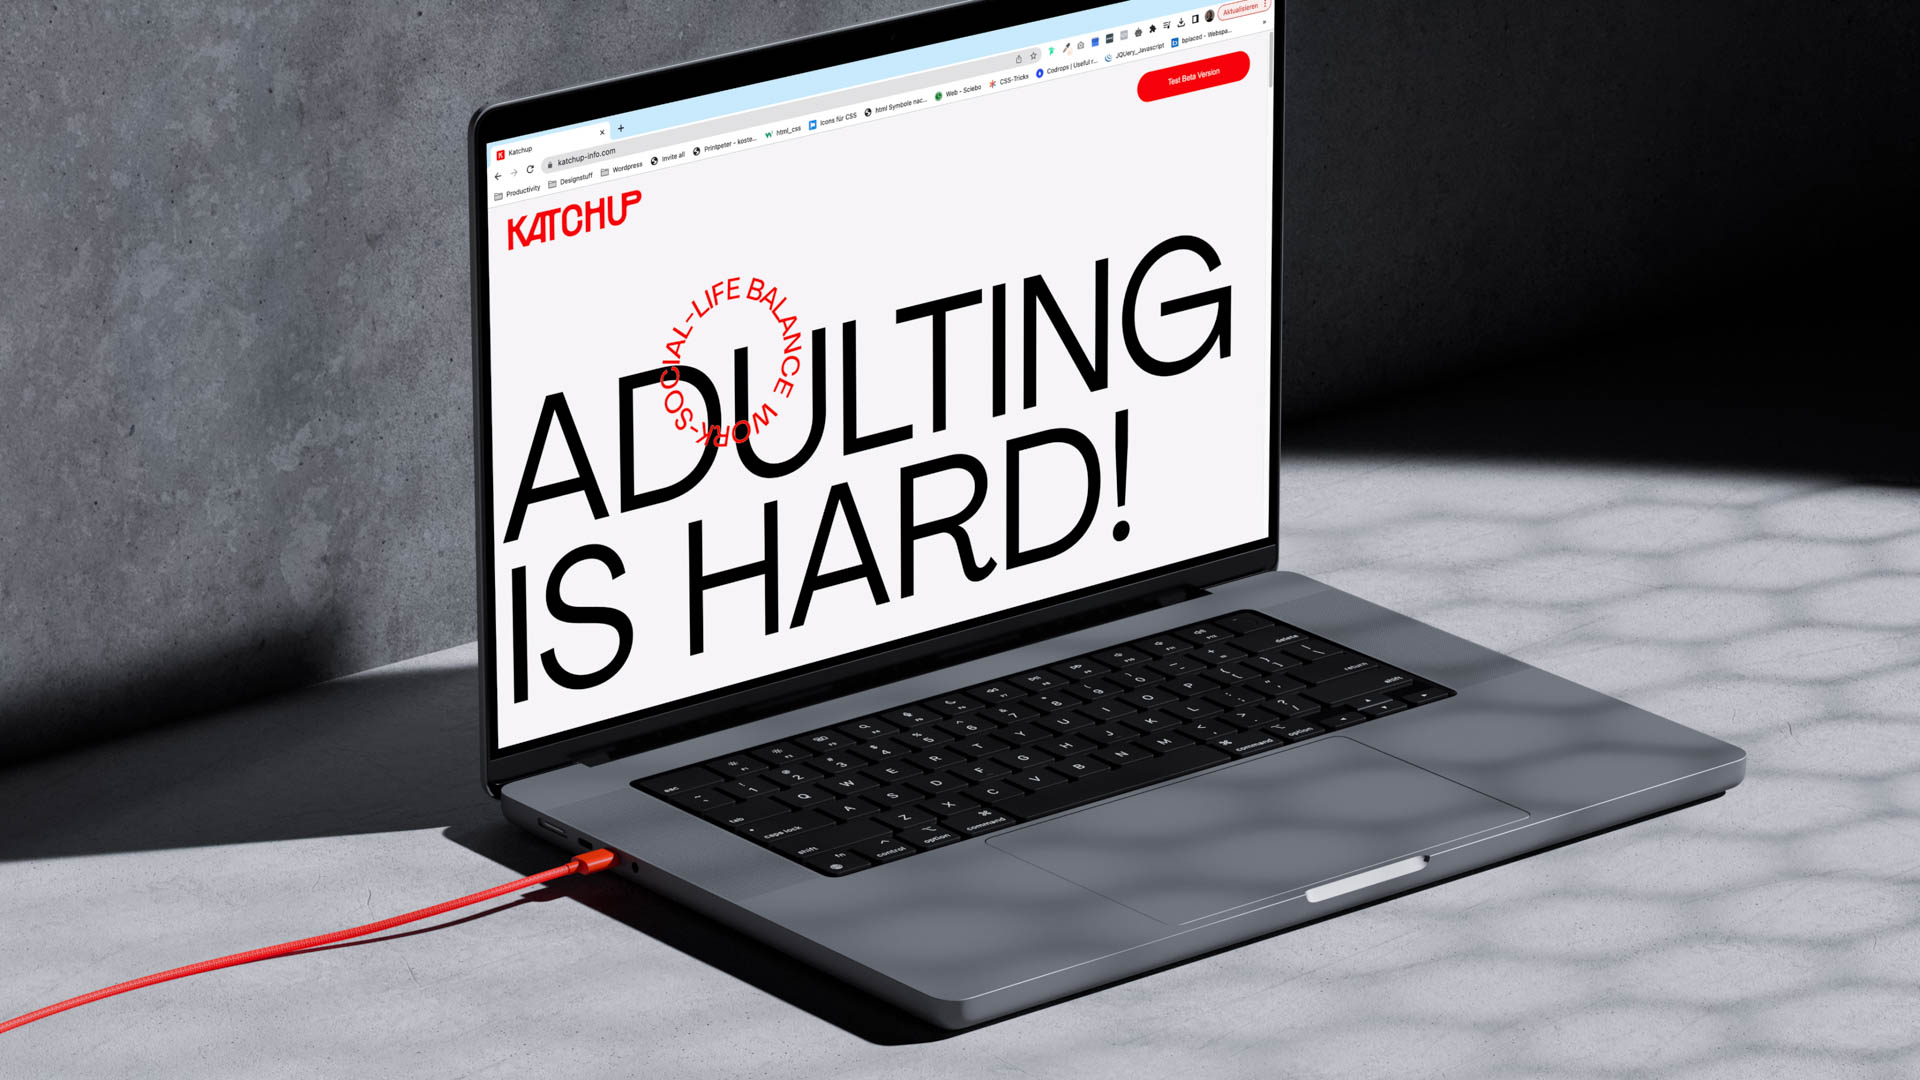 on the ground,  a laptop open to the Katchup app